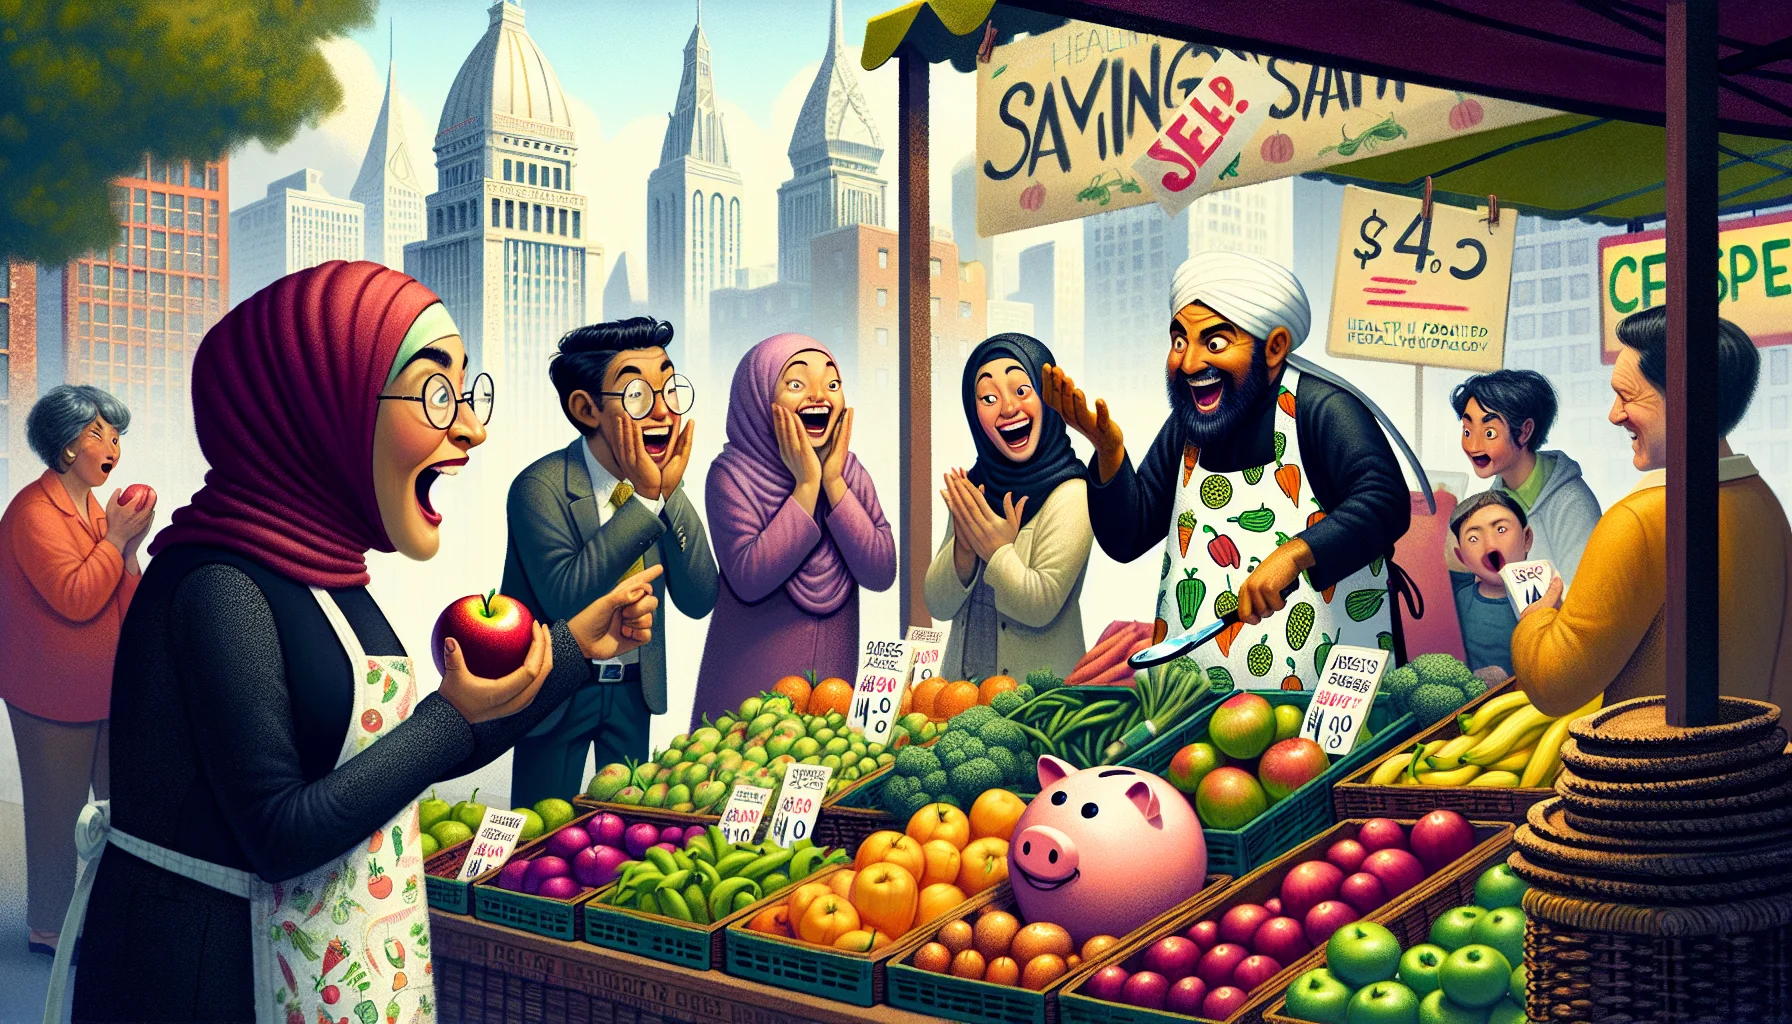 An amusing scene portraying Health-Focused Wednesday at a local farmer's market. A charismatic female vendor of Middle Eastern descent donning an apron covered in vegetables illustrations is offering colorful, fresh produce at an unbelievably low price, making customers clasp their sides in laughter. A Hispanic gentleman is overly surprised, inspecting an apple with an exaggeratedly magnifying glass, while an Asian boy nearby is joyfully shaking a giant piggy bank with 'savings' written on it. The market stalls are piled high with a range of vibrant fruits and vegetables, and signs advertise the reduced prices.